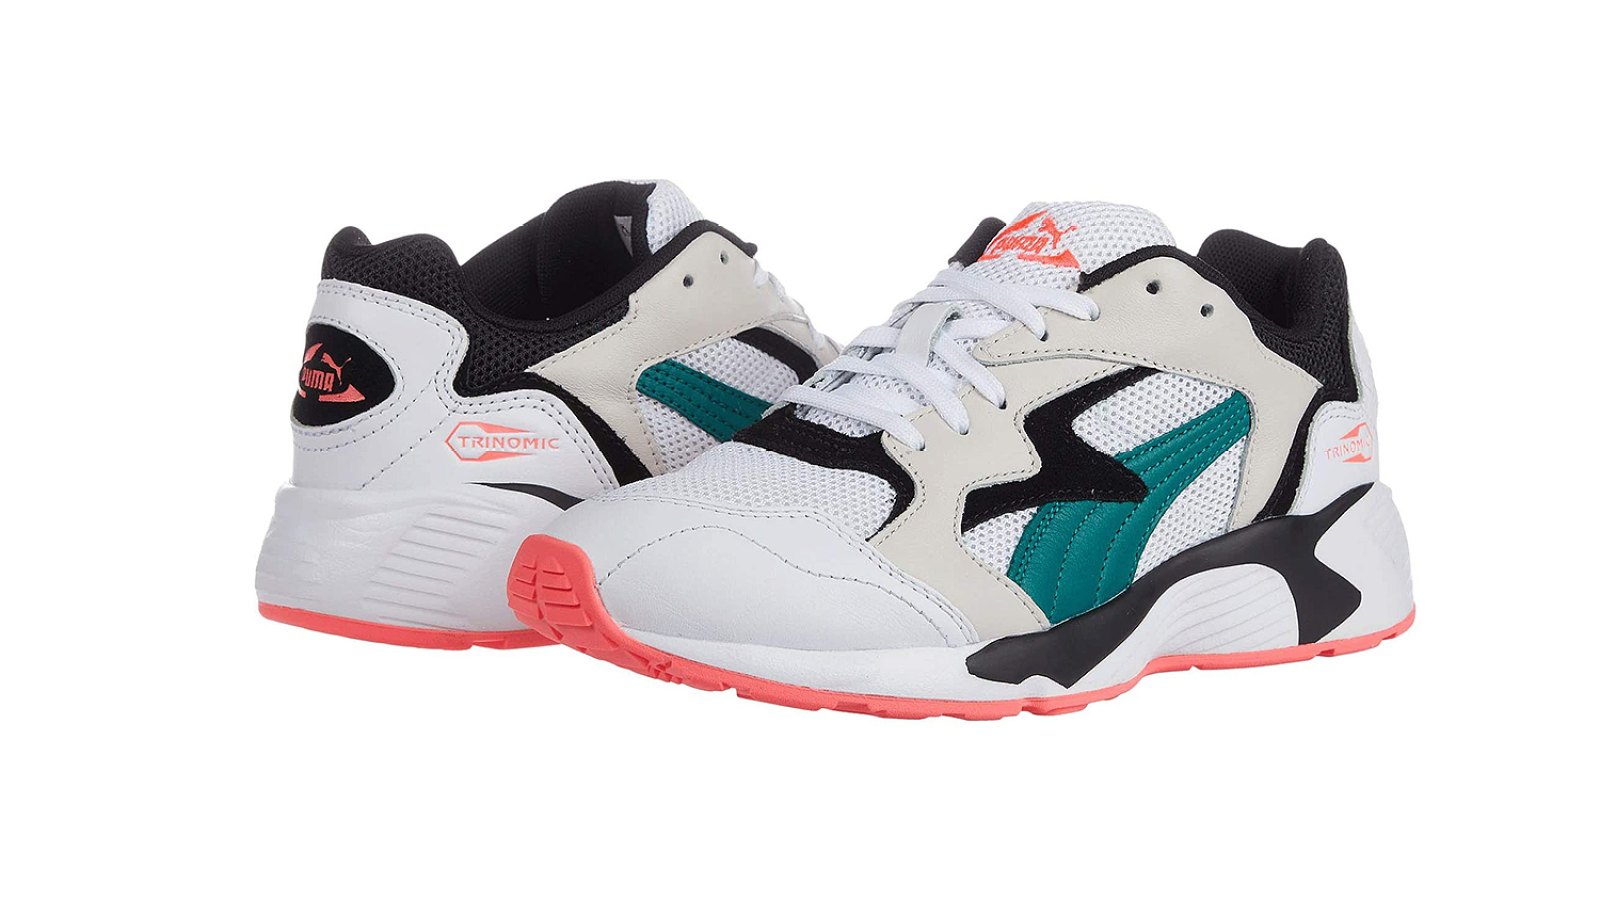 PUMA Prevail Classic sneakers